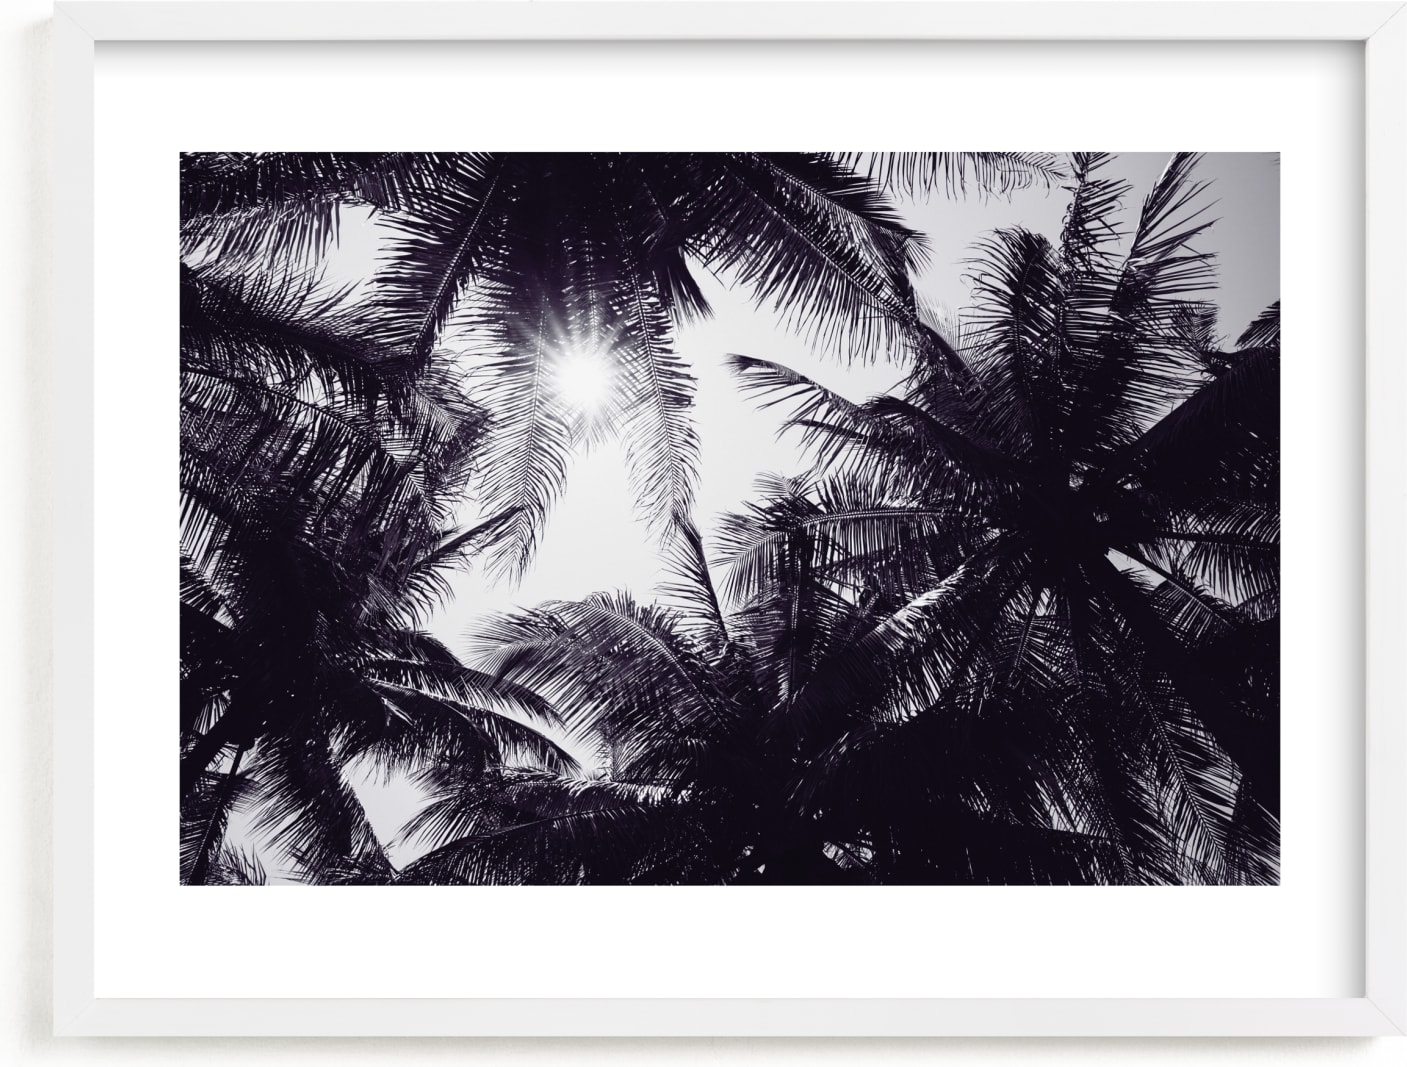 This is a black and white kids wall art by Alaric Yanos called Flare and Shade.